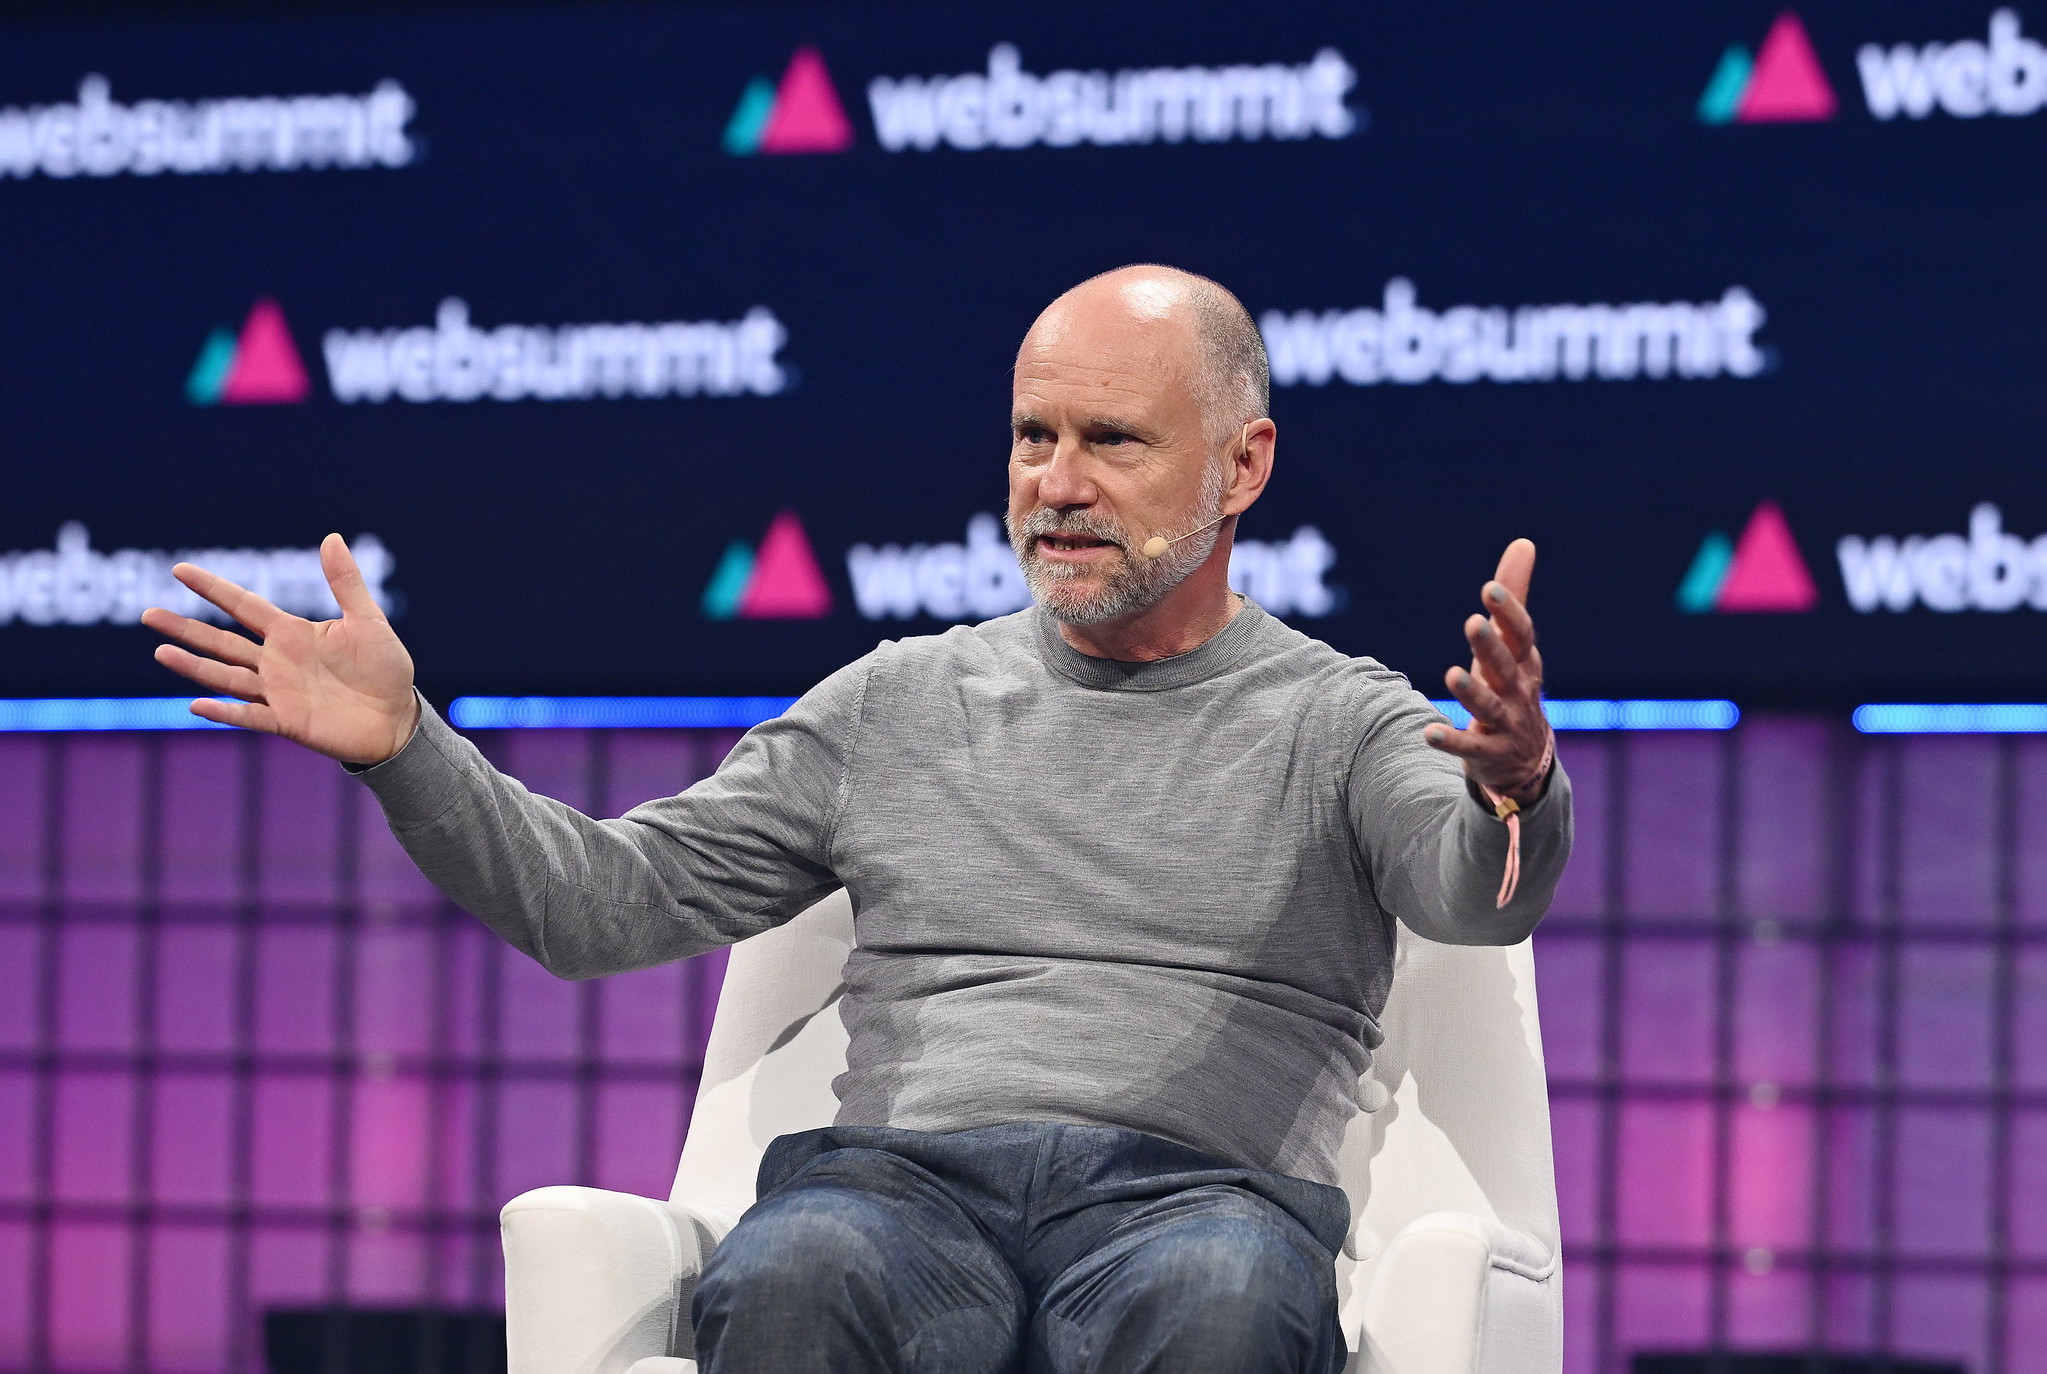 Albert Wenger, Managing Partner, Union Square Ventures, on Centre Stage during day one of Web Summit 2023 at the Altice Arena in Lisbon, Portugal.